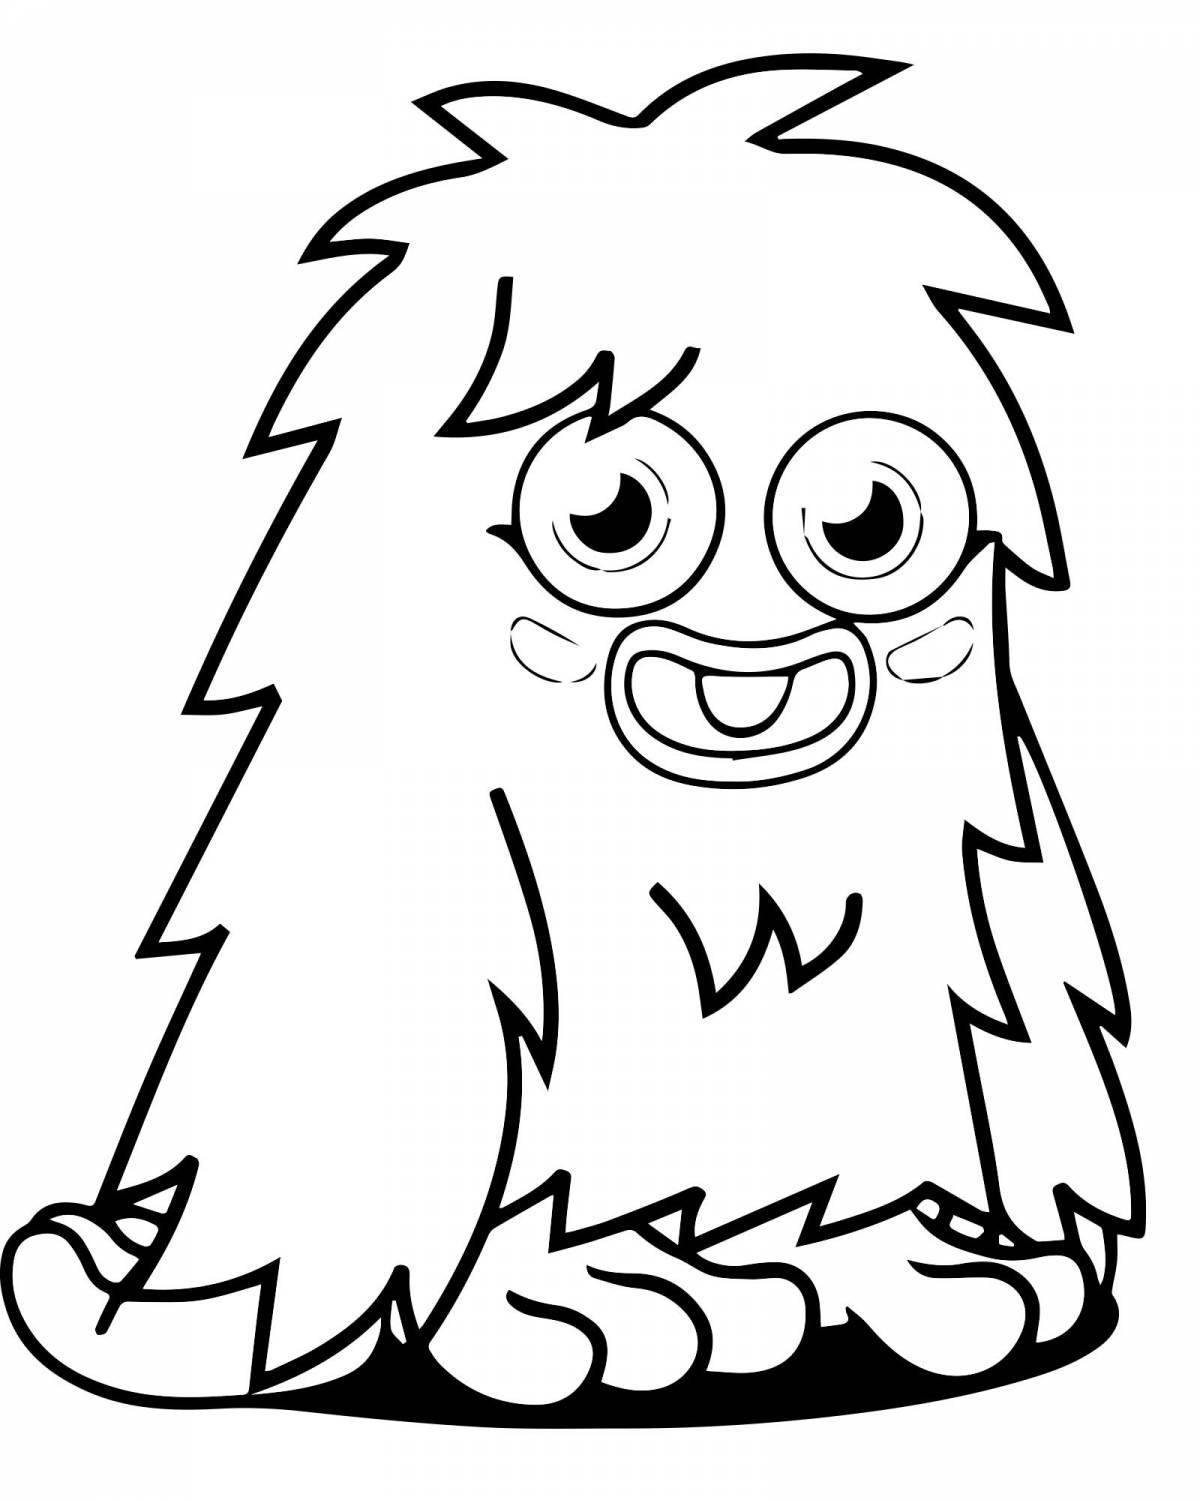 Weird monster coloring page